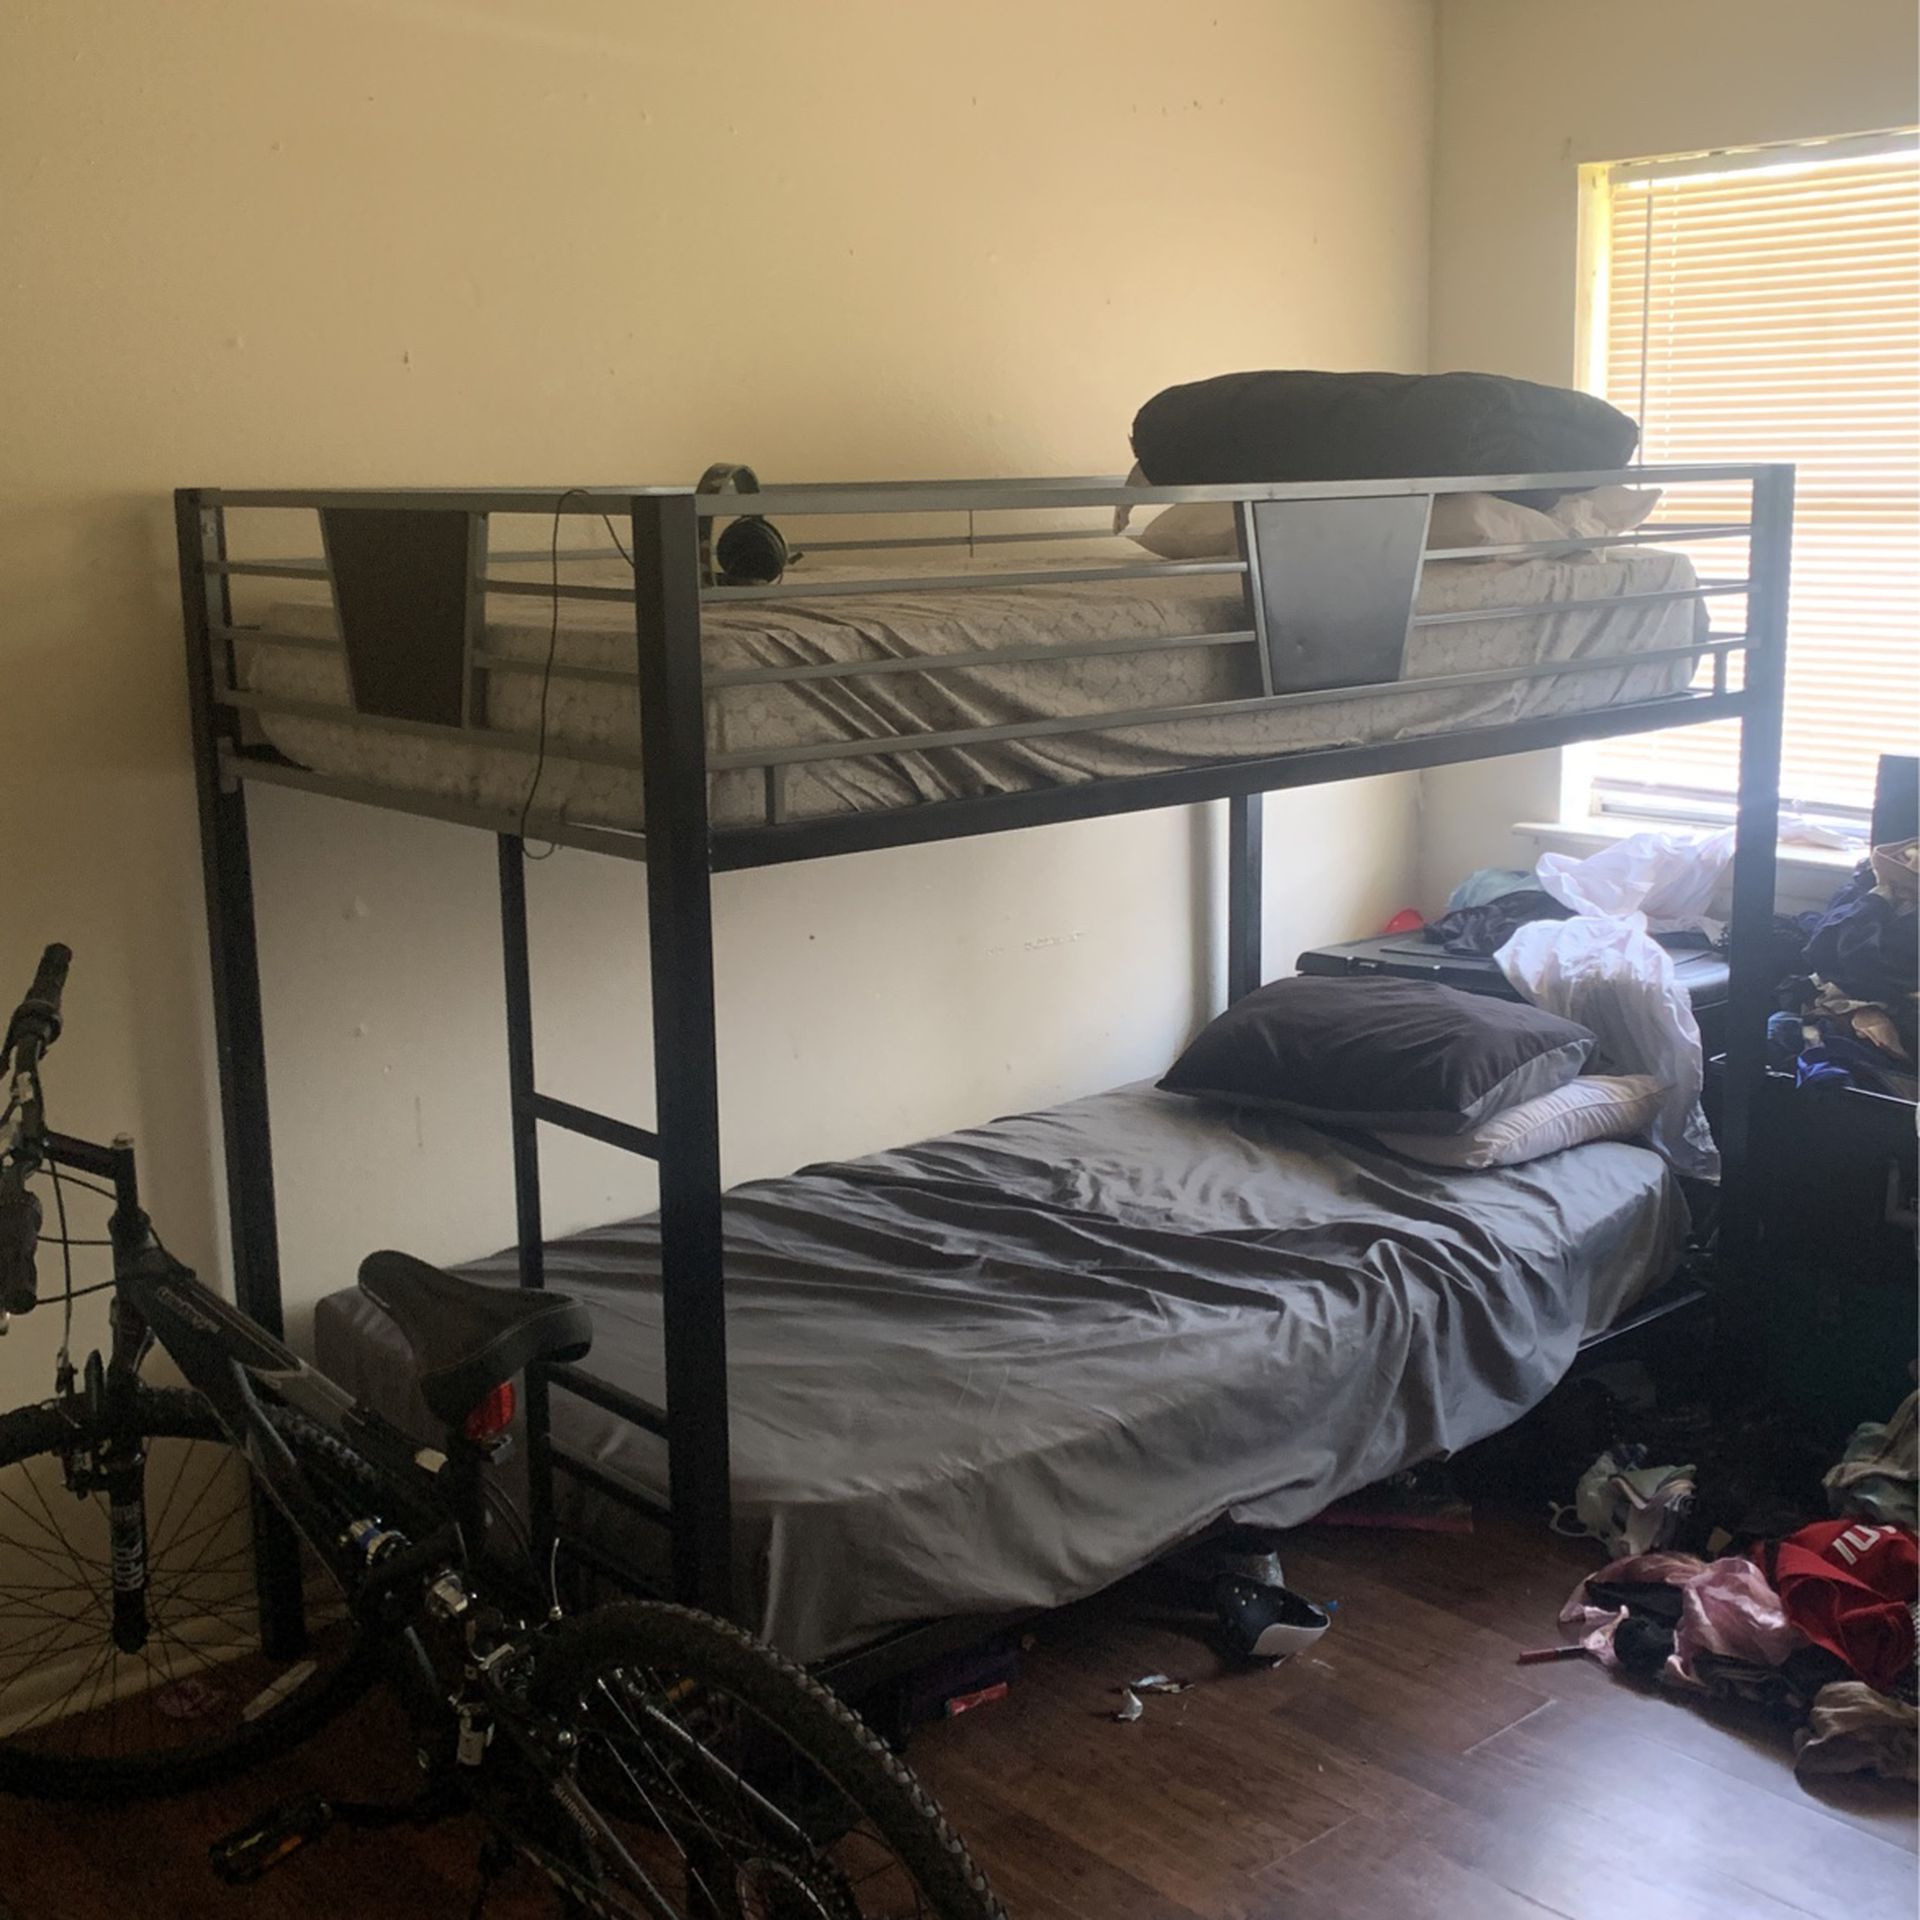 Twin Bed And Mattress For Sale 